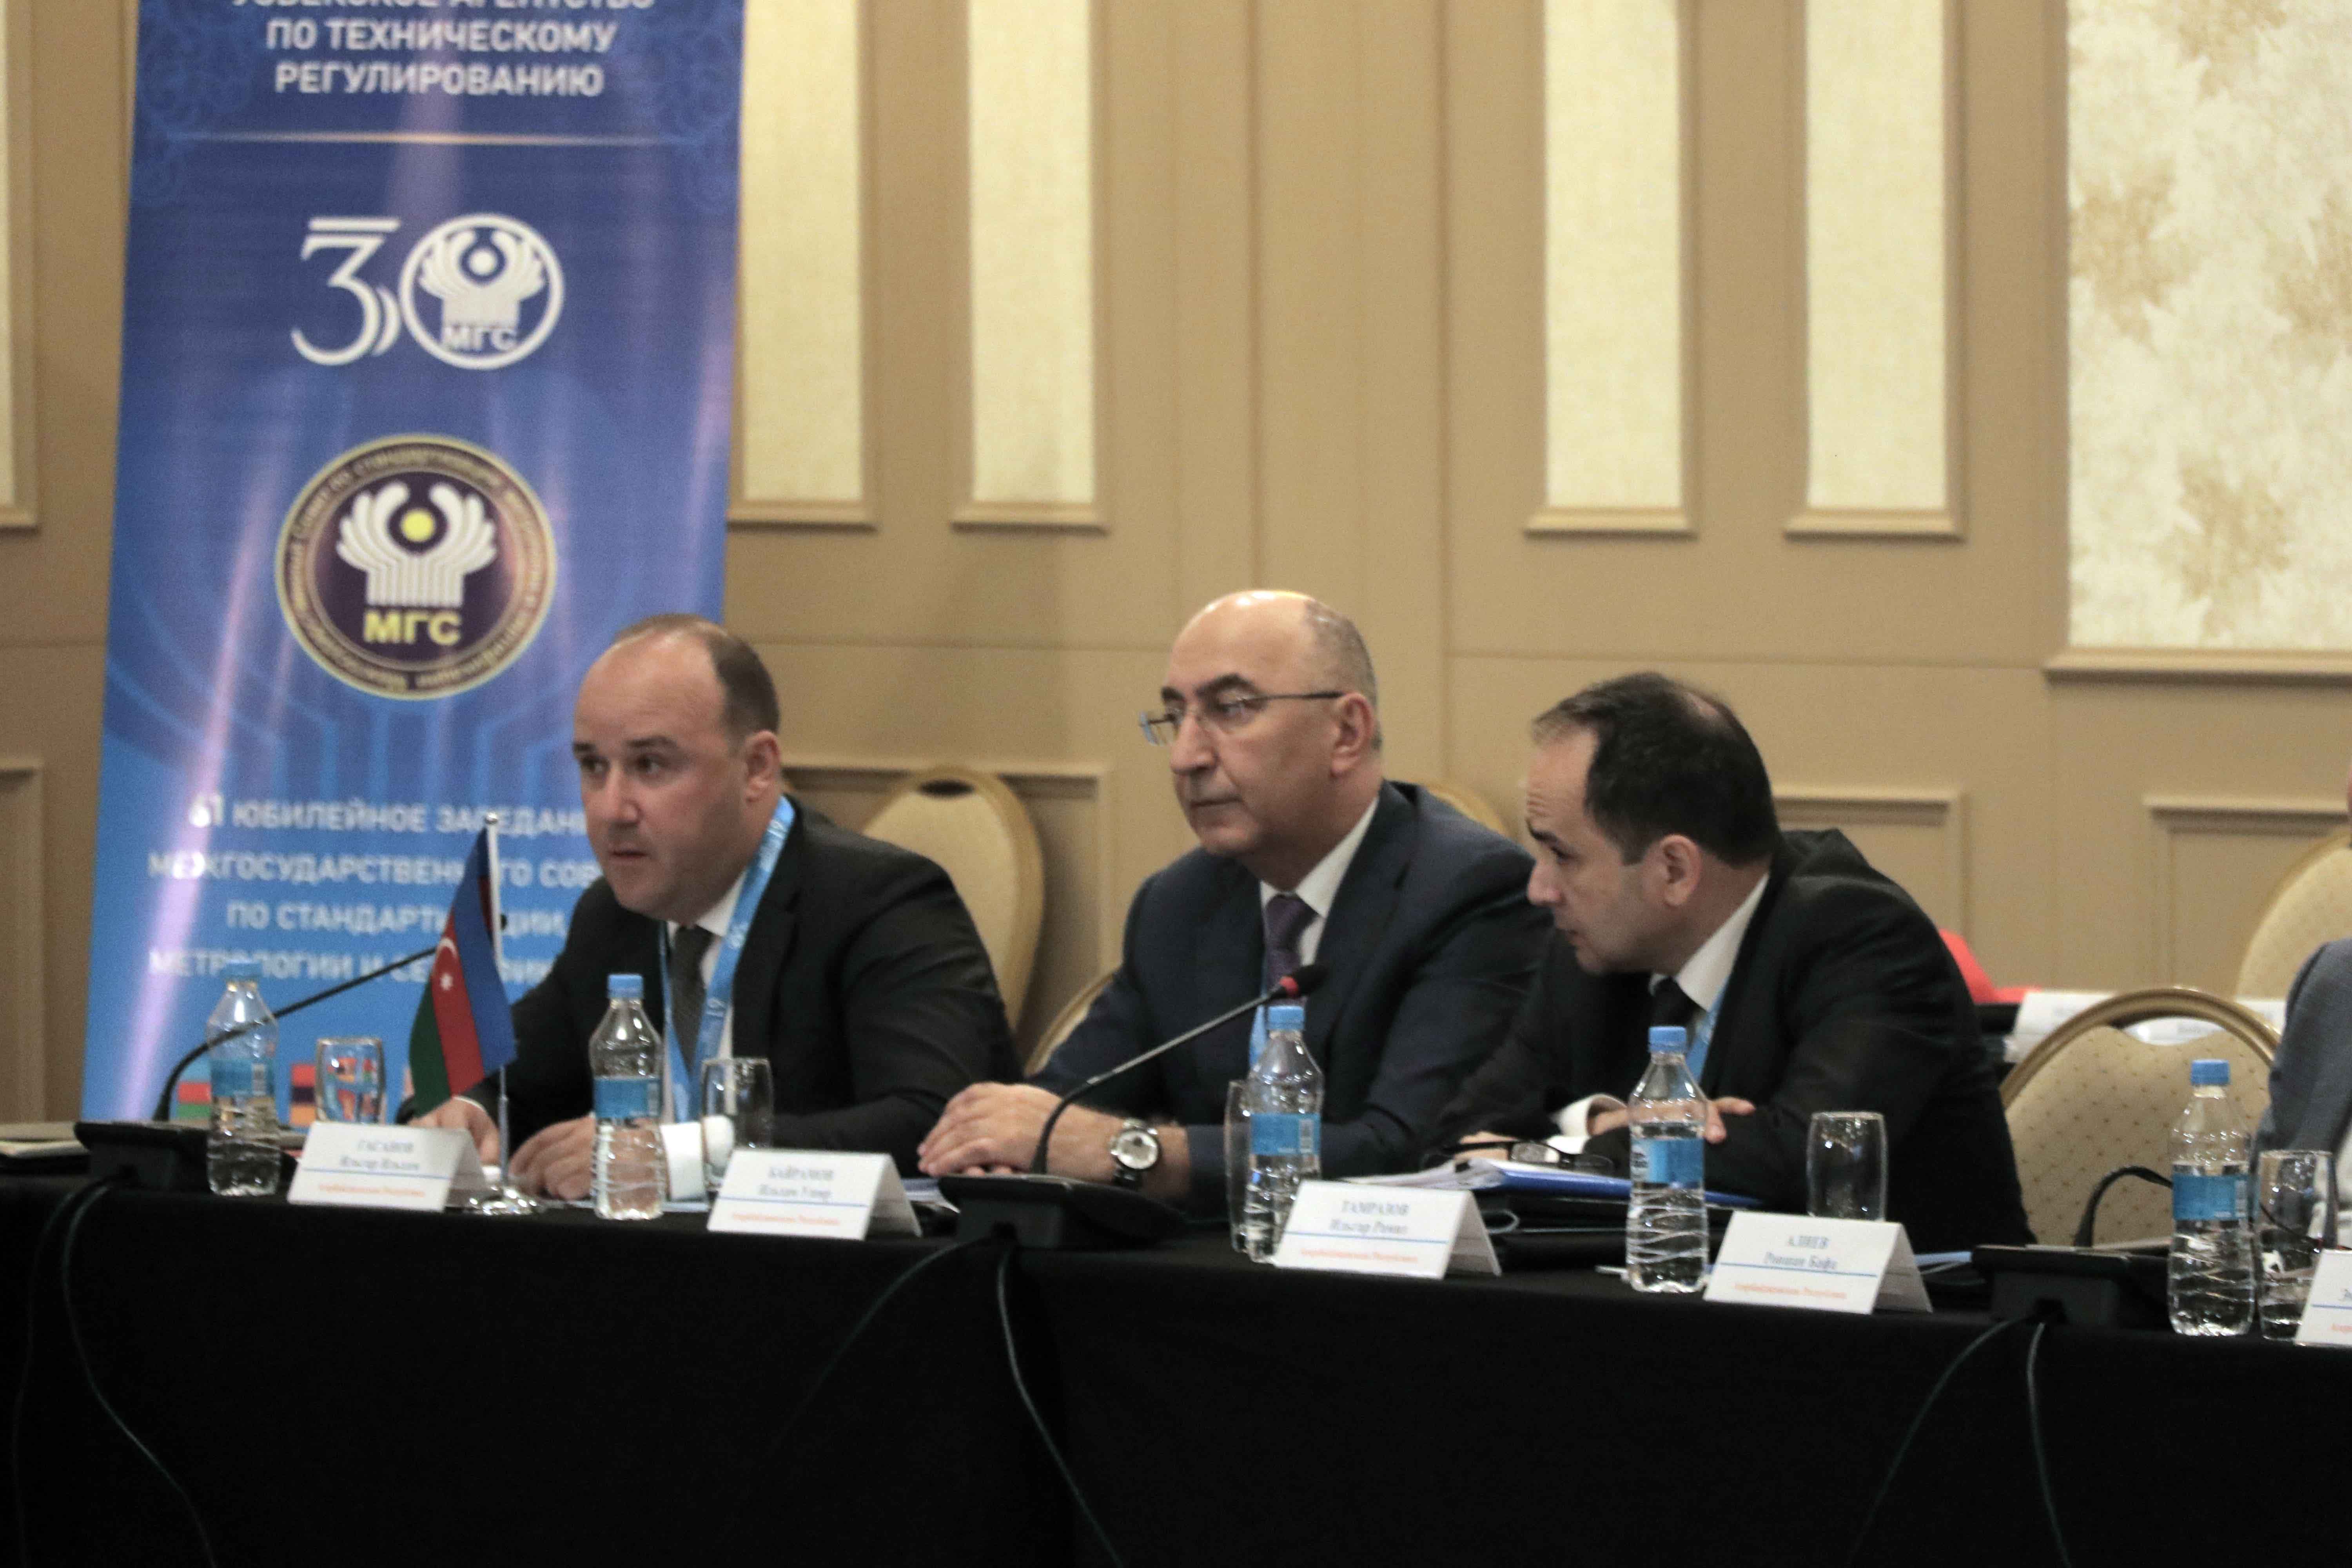 Representatives of the State Service participated in the international event on the topic of quality infrastructure